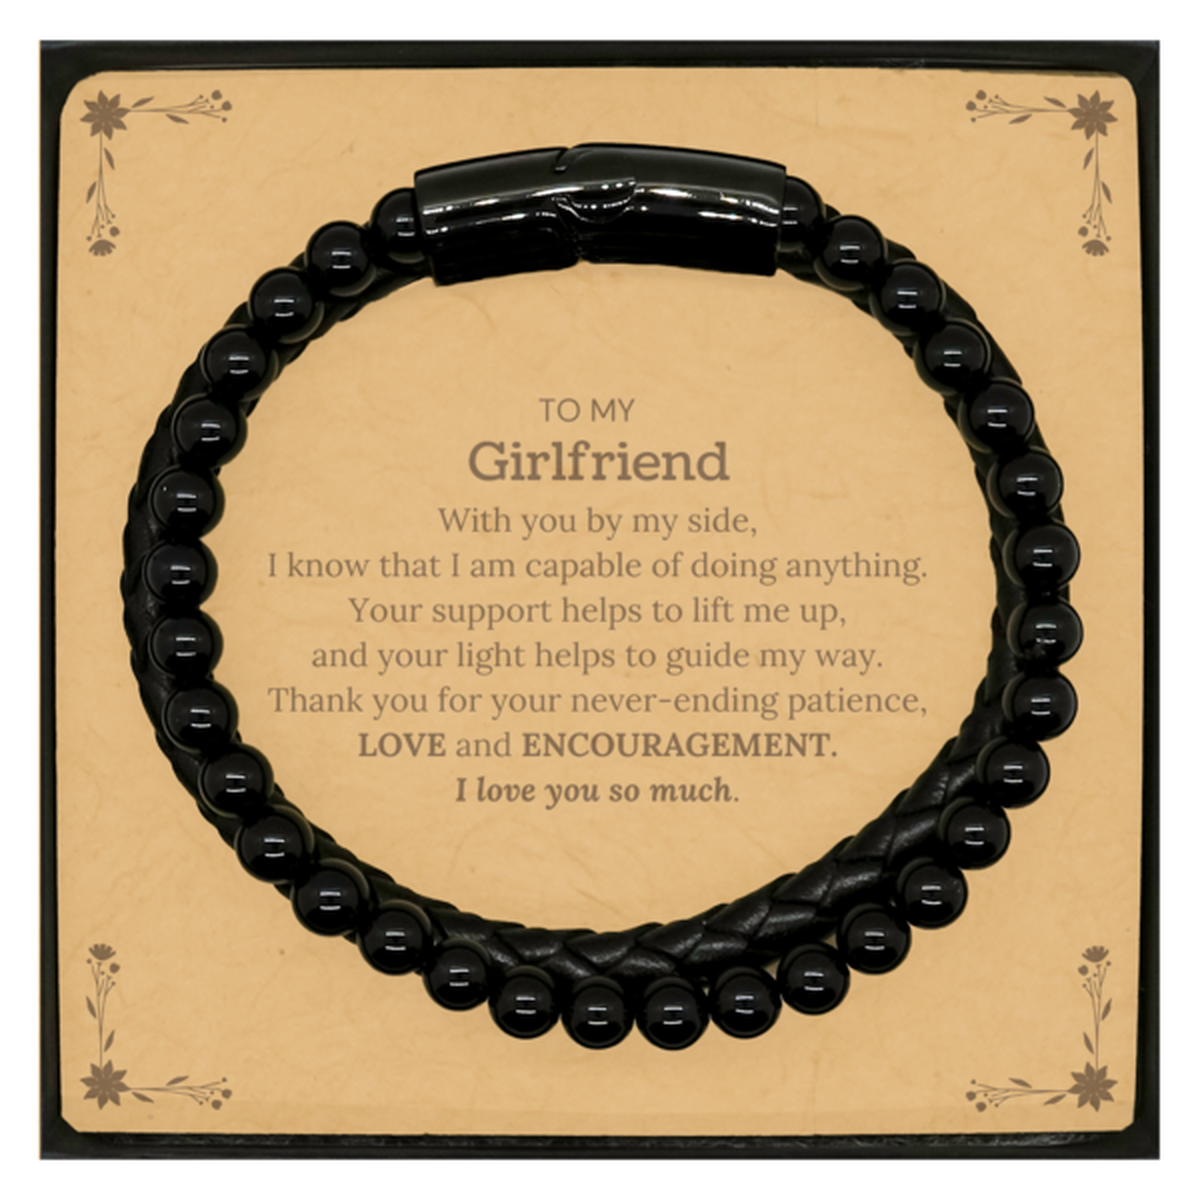 Appreciation Girlfriend Stone Leather Bracelets Gifts, To My Girlfriend Birthday Christmas Wedding Keepsake Gifts for Girlfriend With you by my side, I know that I am capable of doing anything. I love you so much